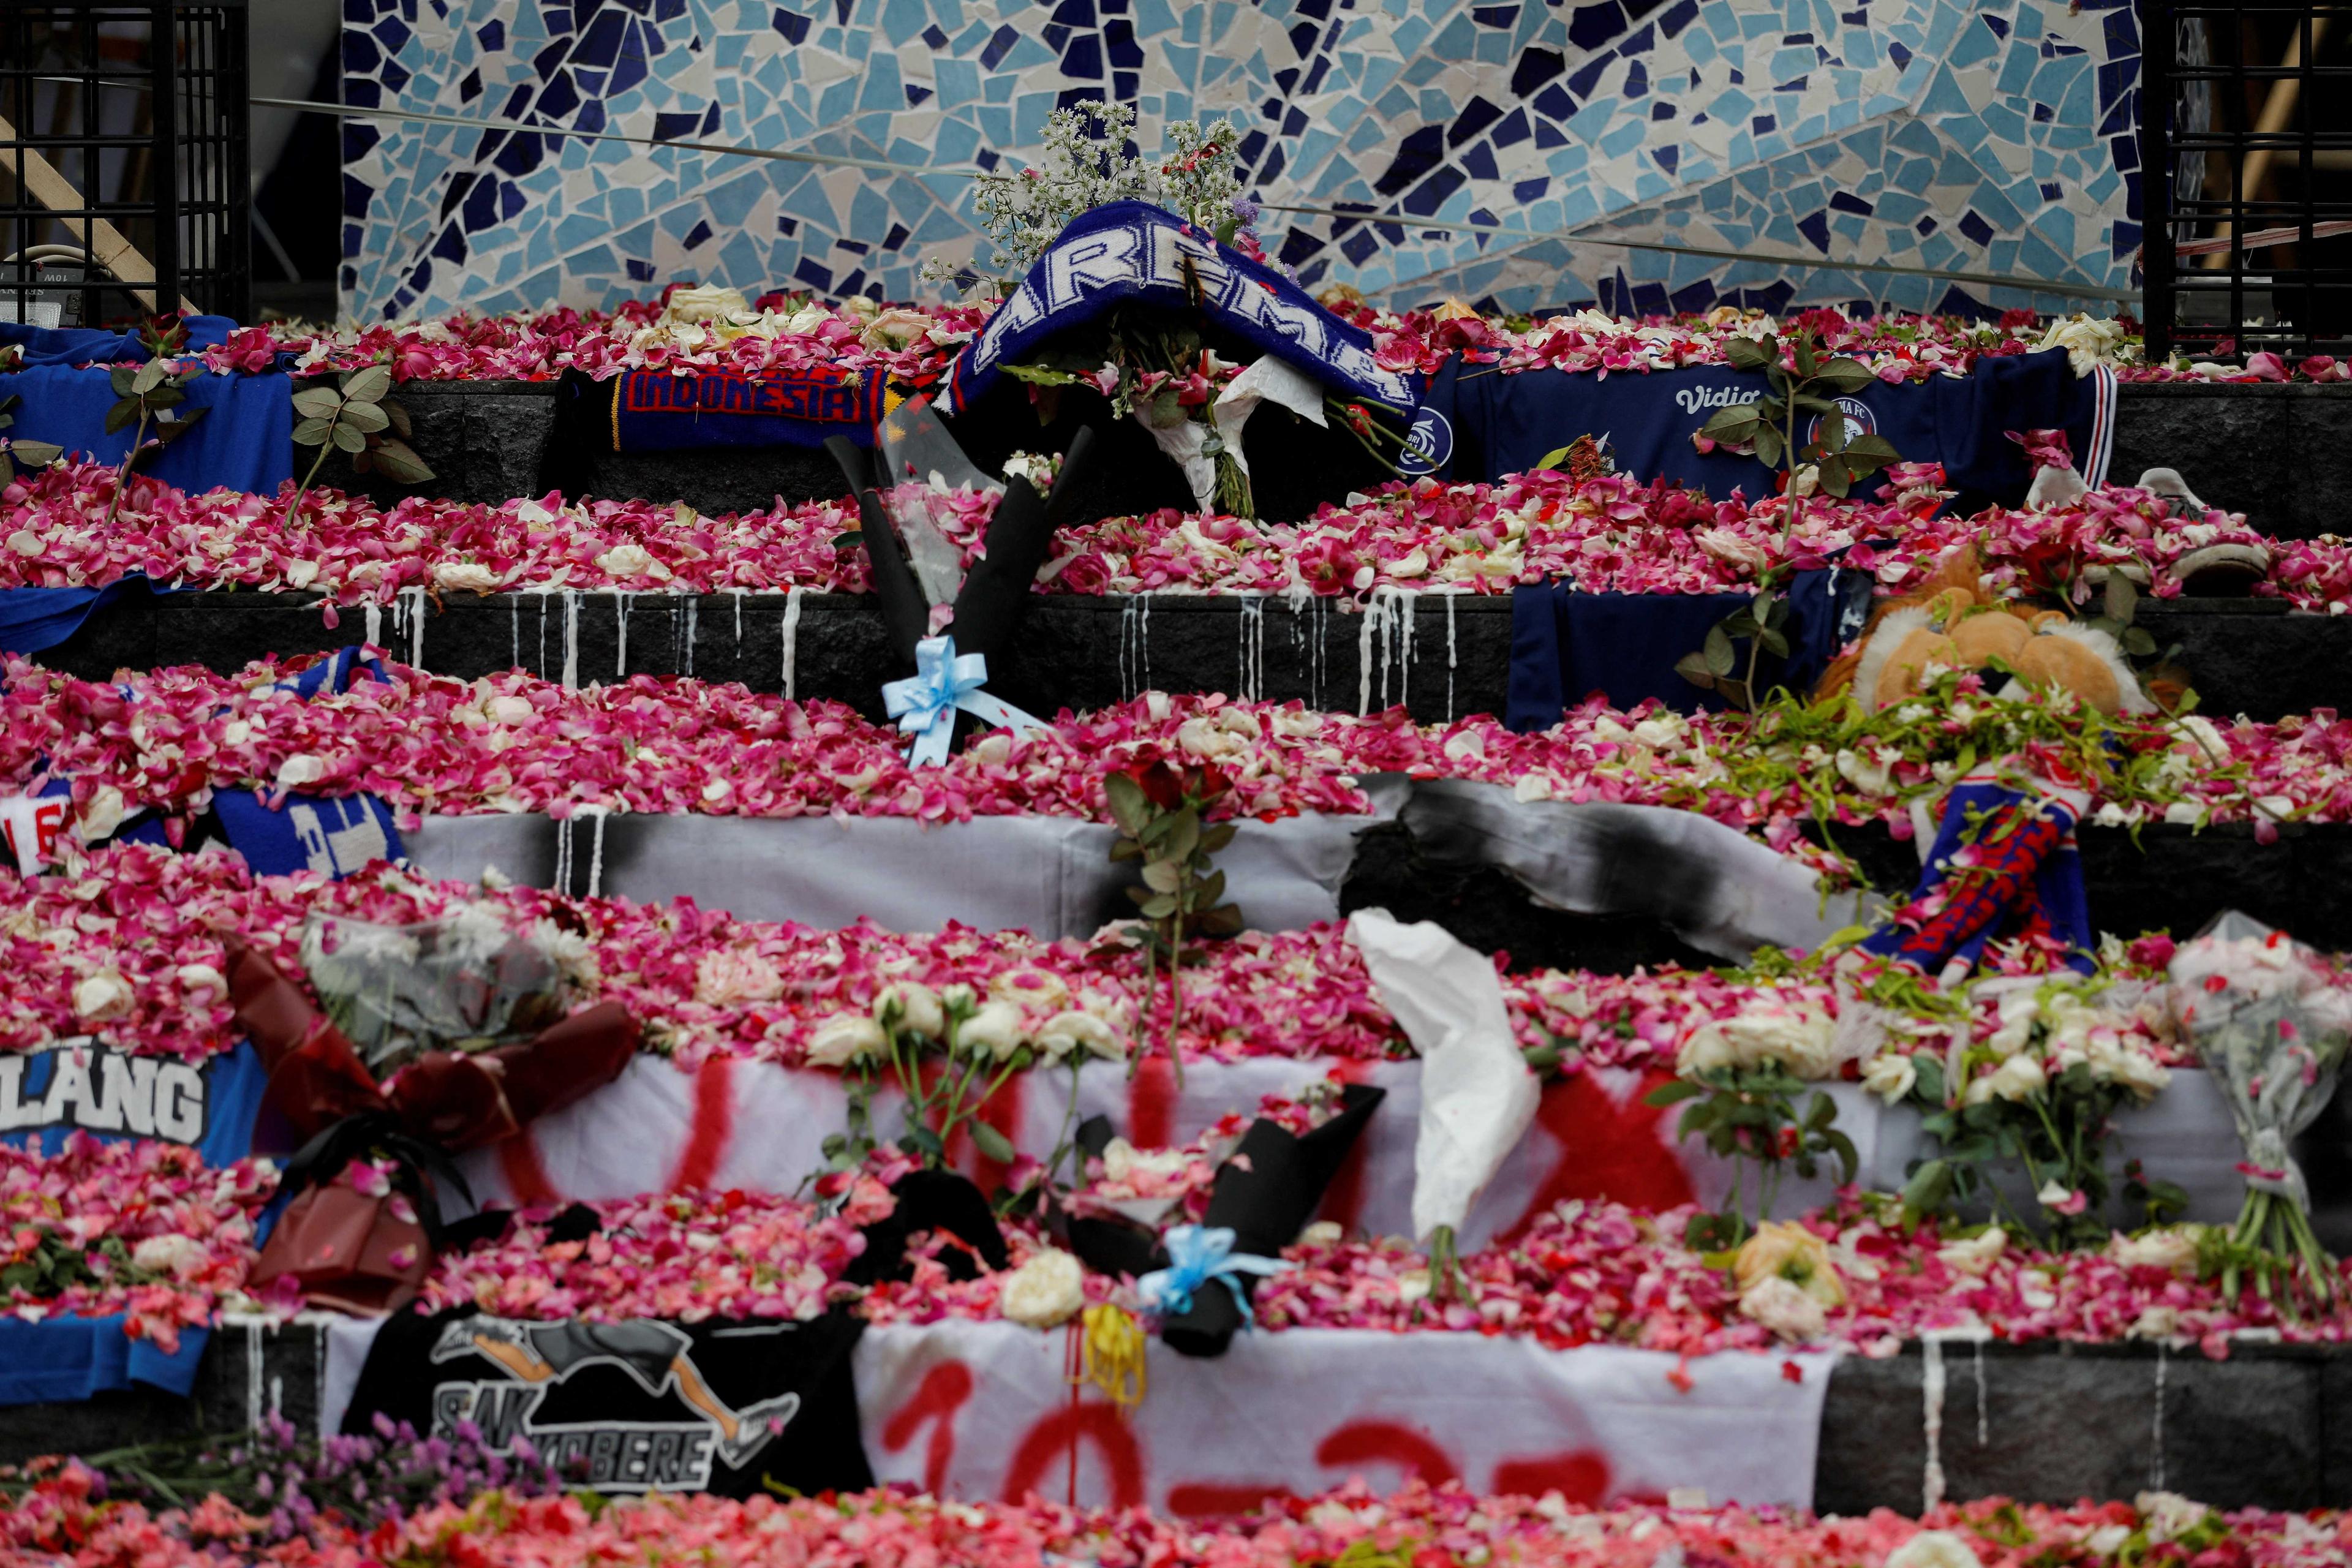 Petals and Arema FC supporters' tributes are placed on a monument to pay condolence to the victims of a riot and stampede following a football match between Arema FC and Persebaya Surabaya teams, outside the Kanjuruhan Stadium, in Malang, East Java province, Indonesia, Oct 3. Photo: Reuters